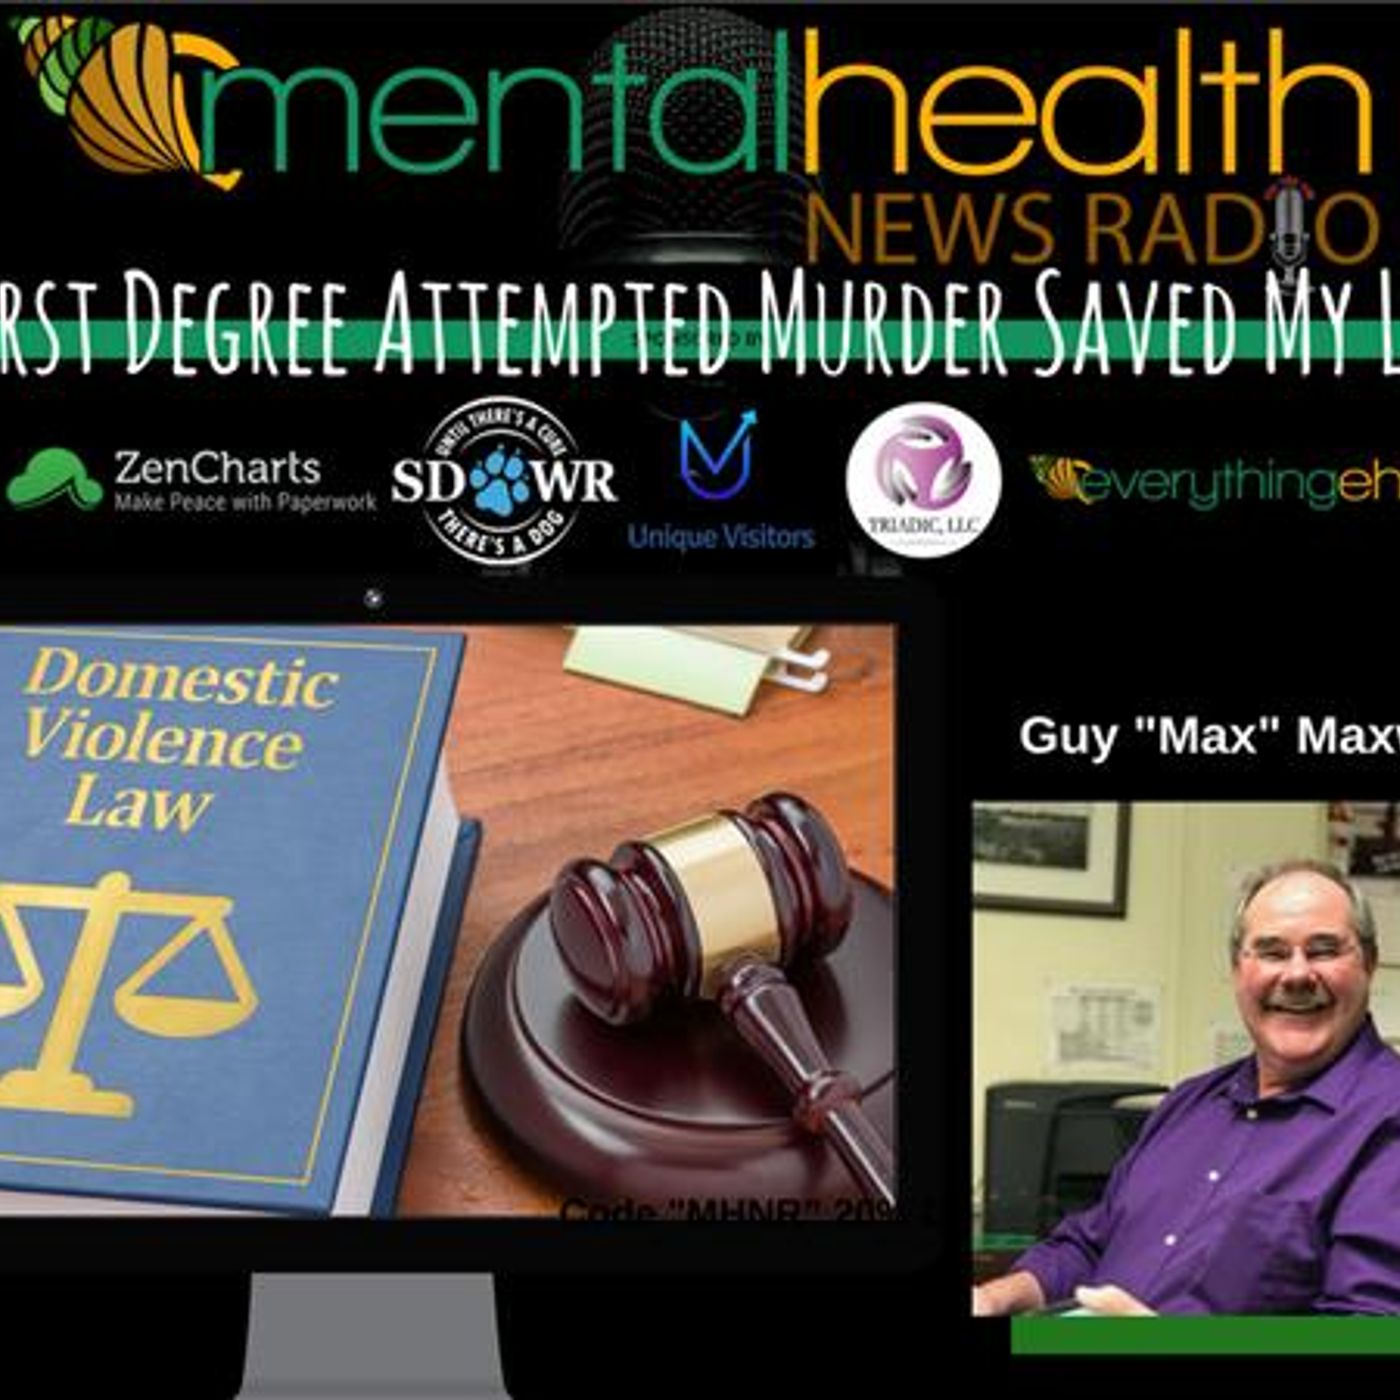 Mental Health News Radio - First Degree Attempted Murder Saved My Life